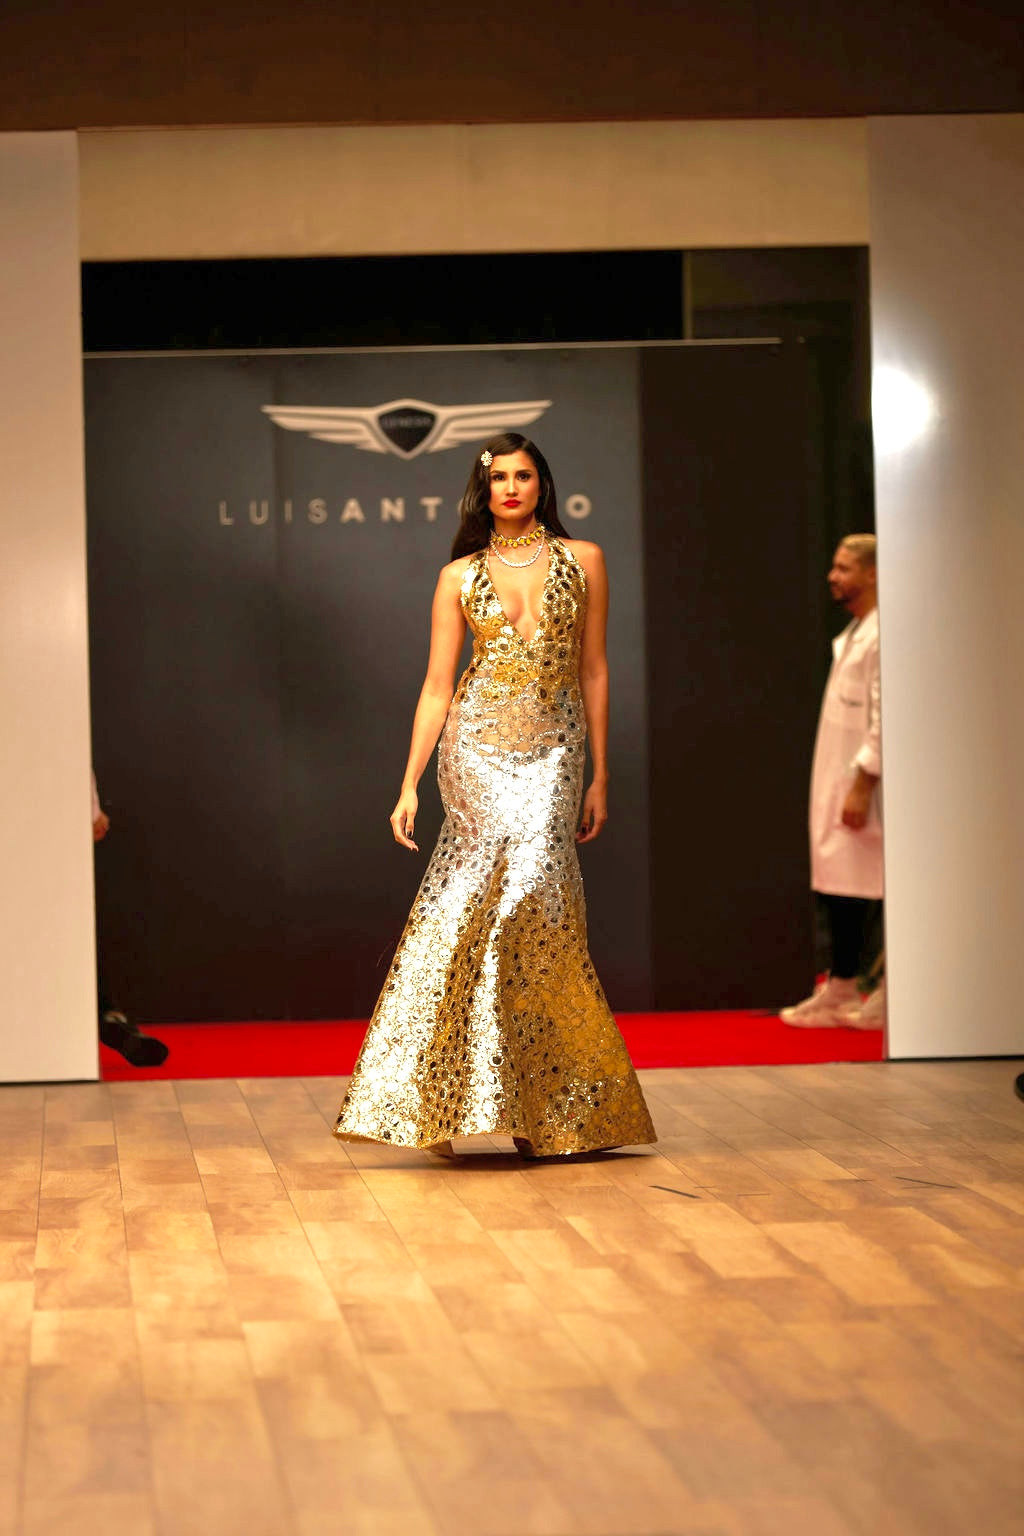 Halter gold and silver dress with mermaid skirt